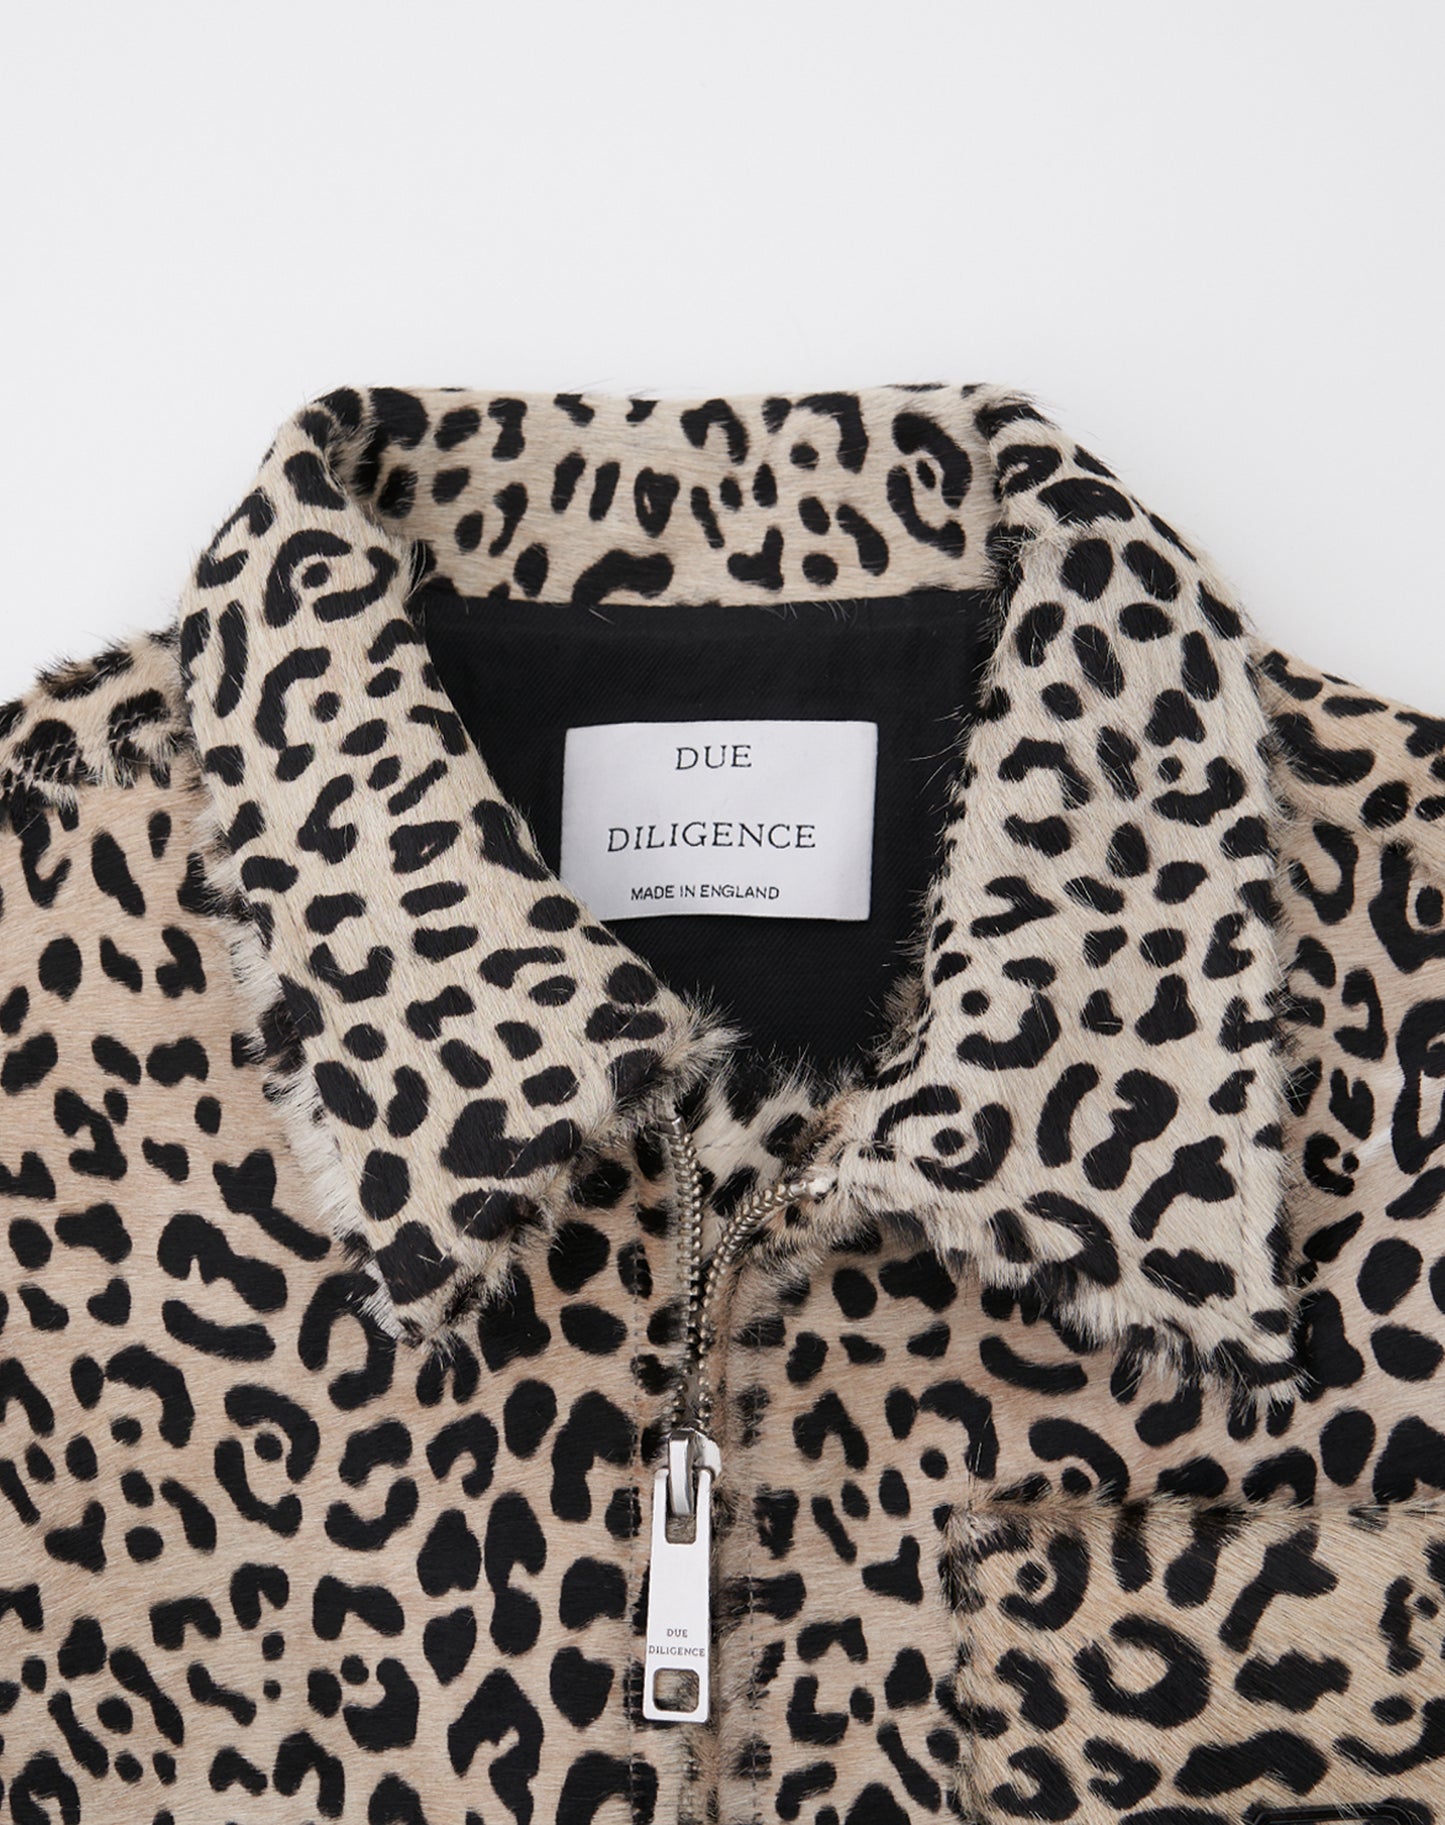 Leopard Print Cow Hair Leather Trucker Jacket - Due Diligence Apparel